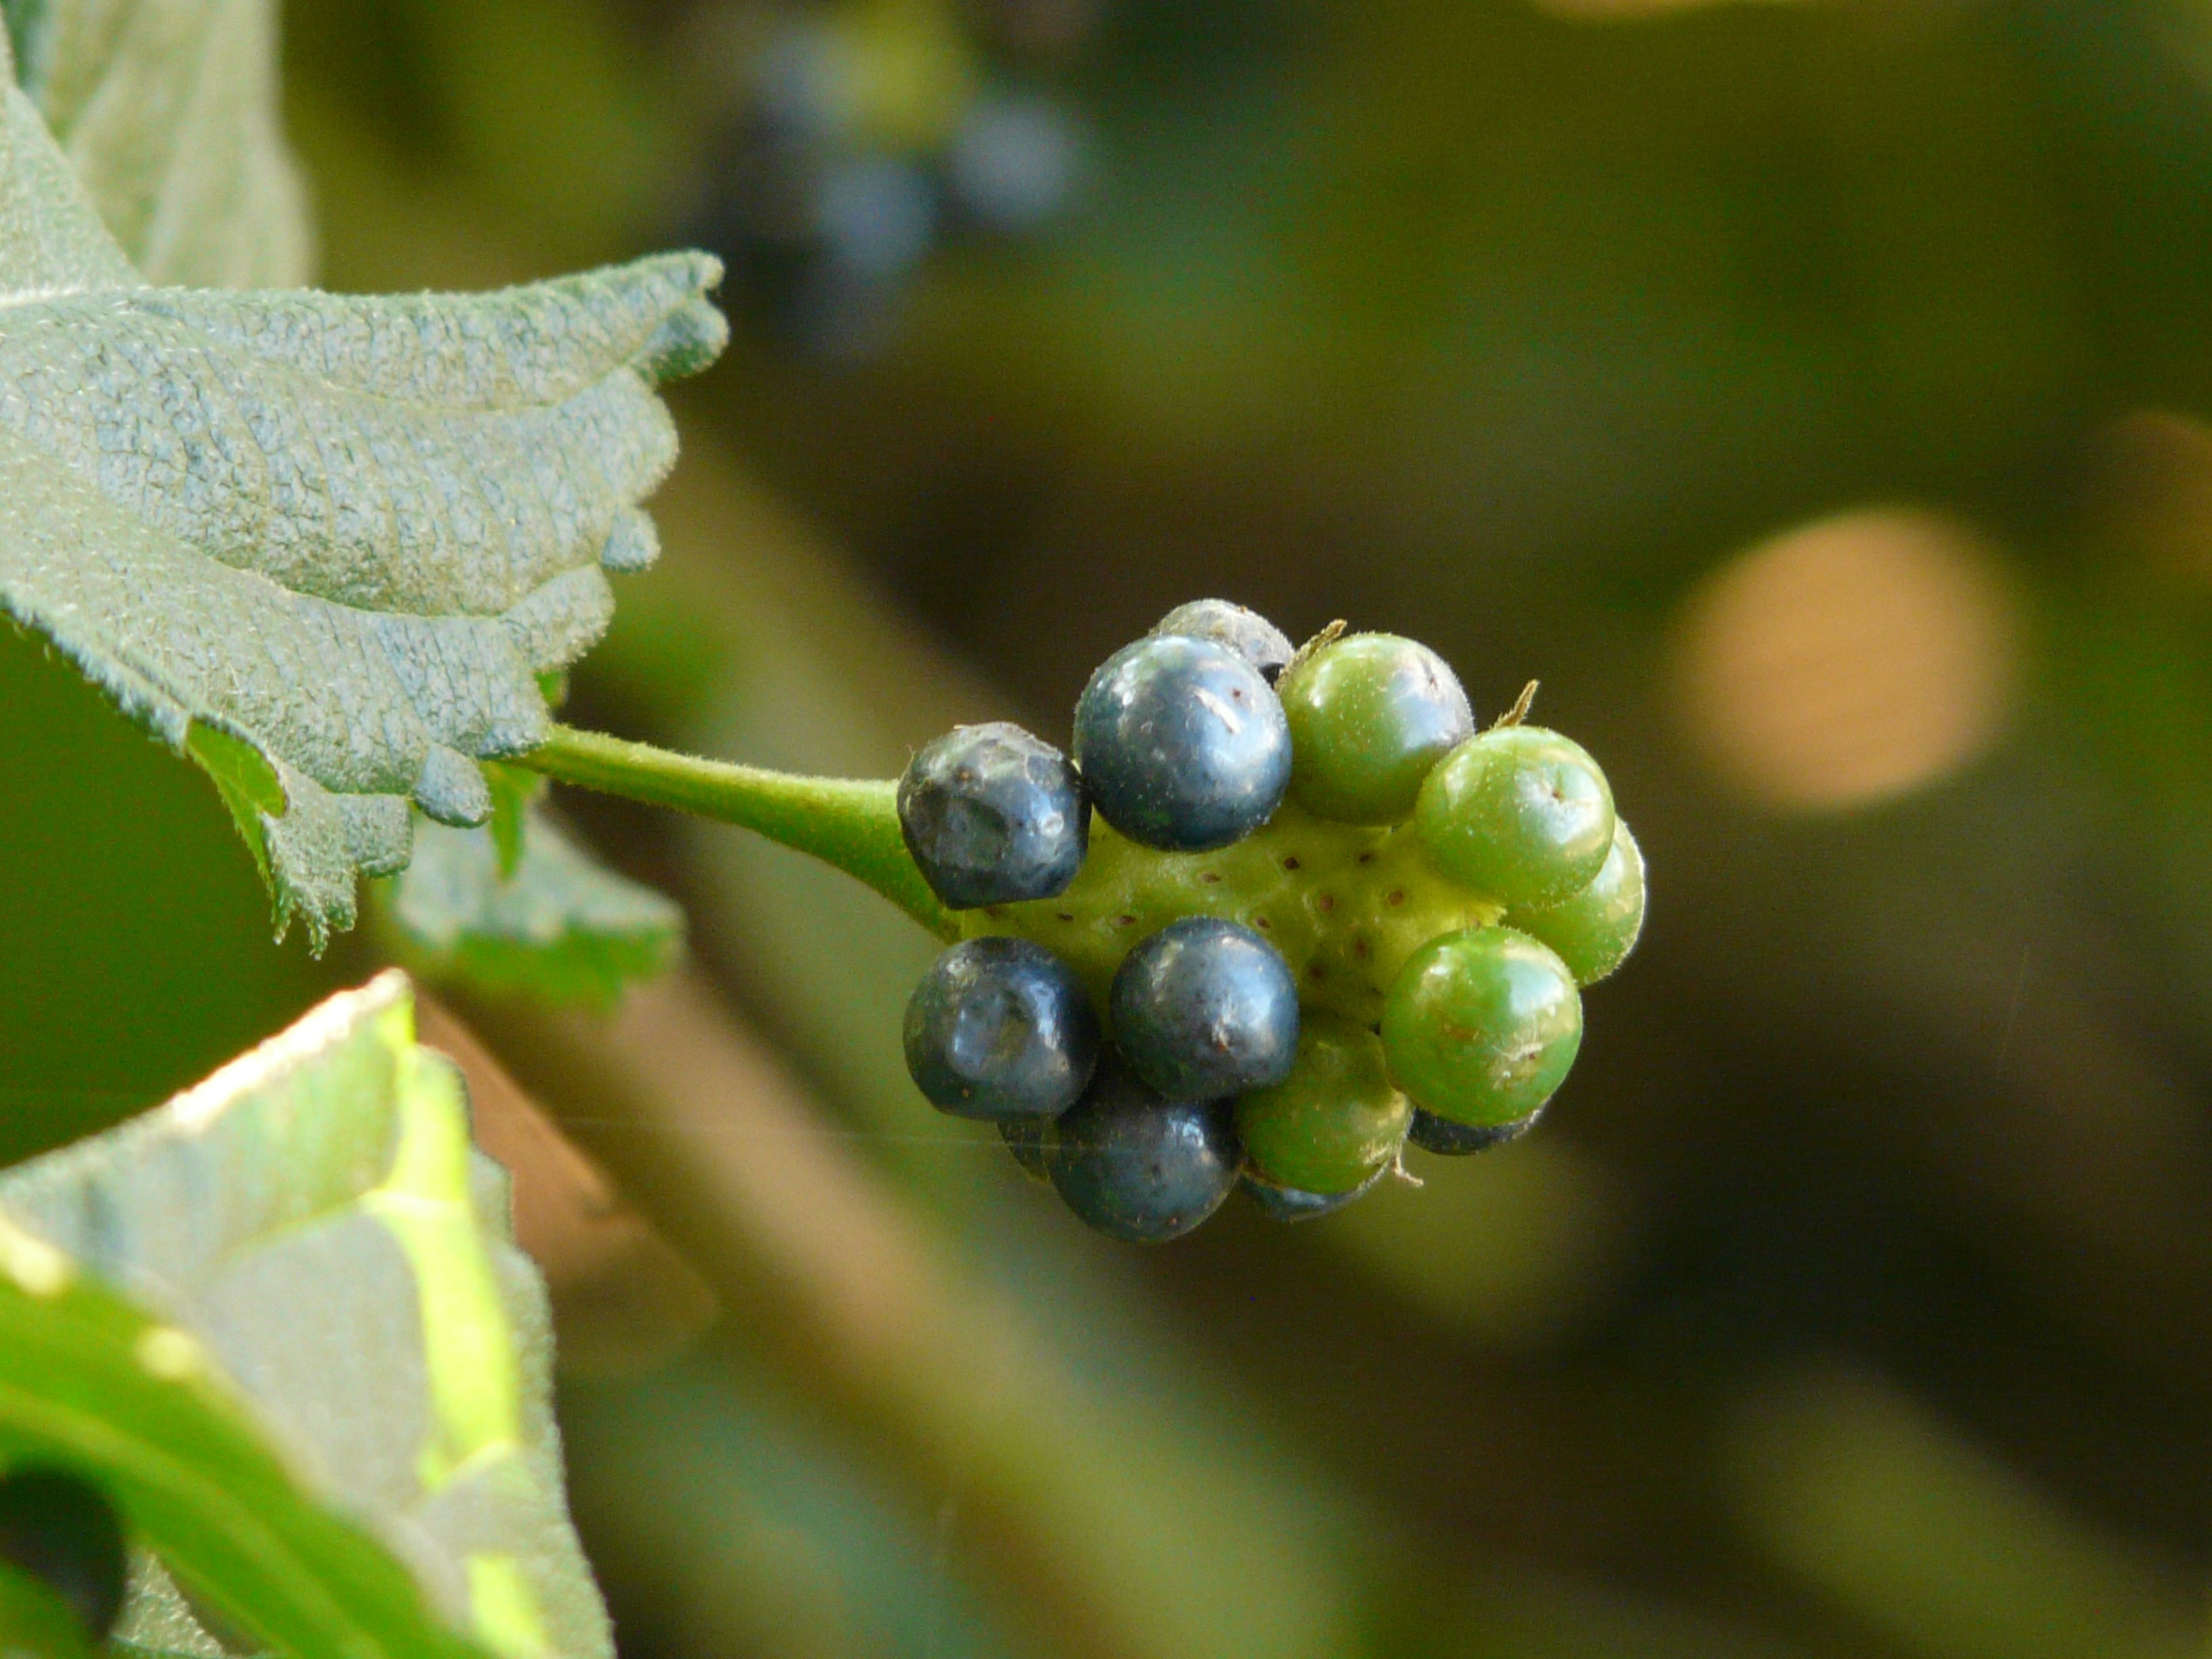 green and gray round fruits